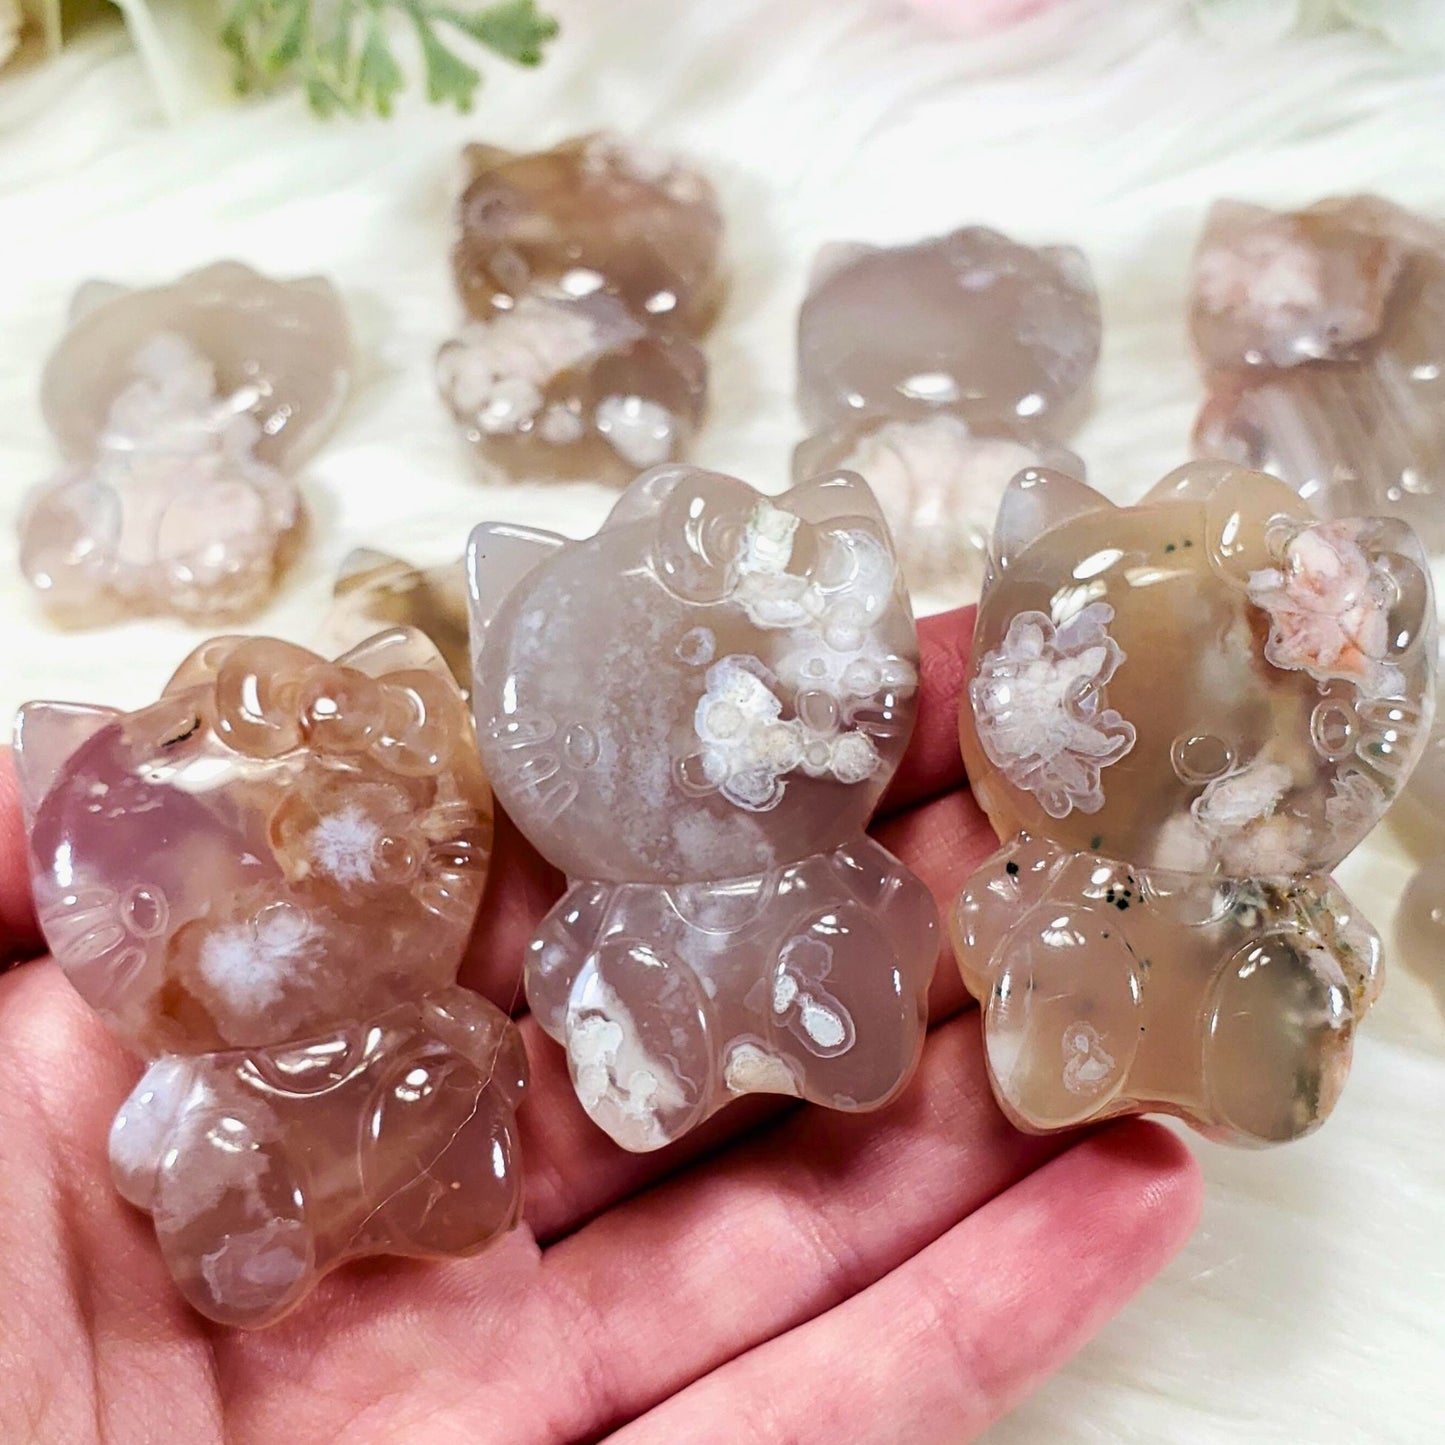 Flower Agate Crystal Hello Kitty in 2 sizes